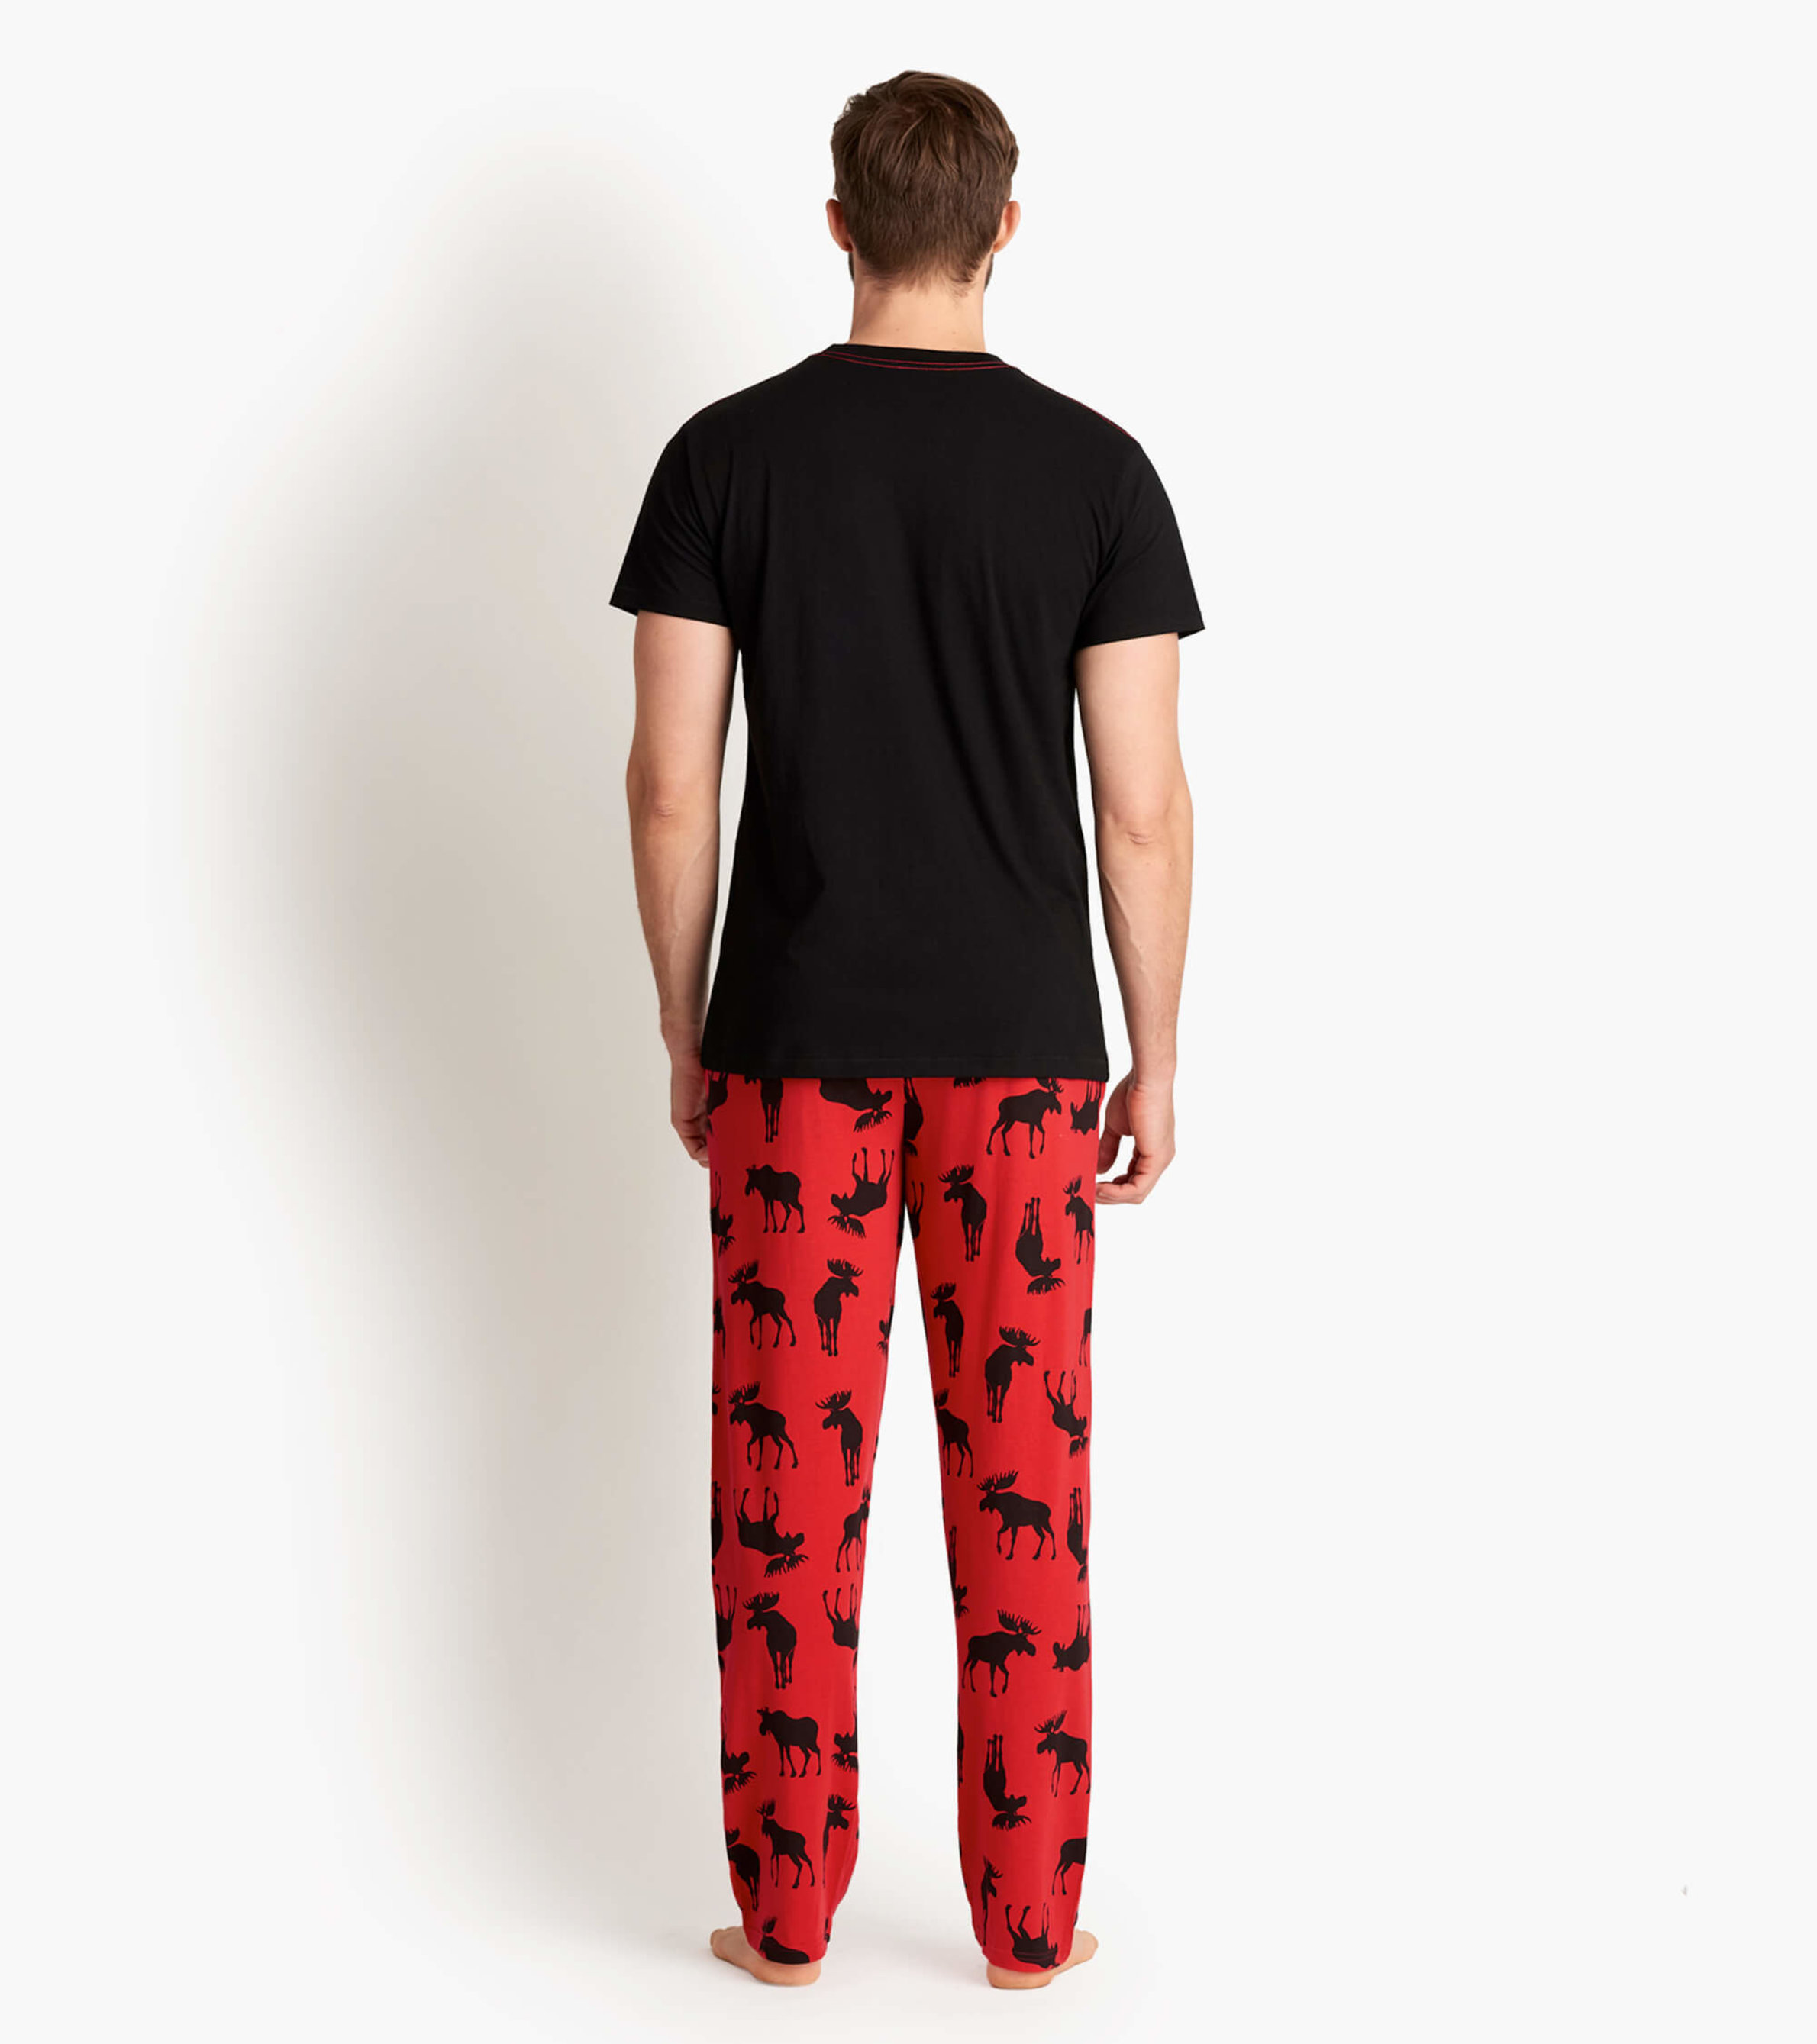 https://cdn.littlebluehouse.com/product_images/moose-on-red-mens-jersey-pajama-pants/PA4WIMO101_M2_jpg/pdp_zoom.jpg?c=1590164763&locale=en